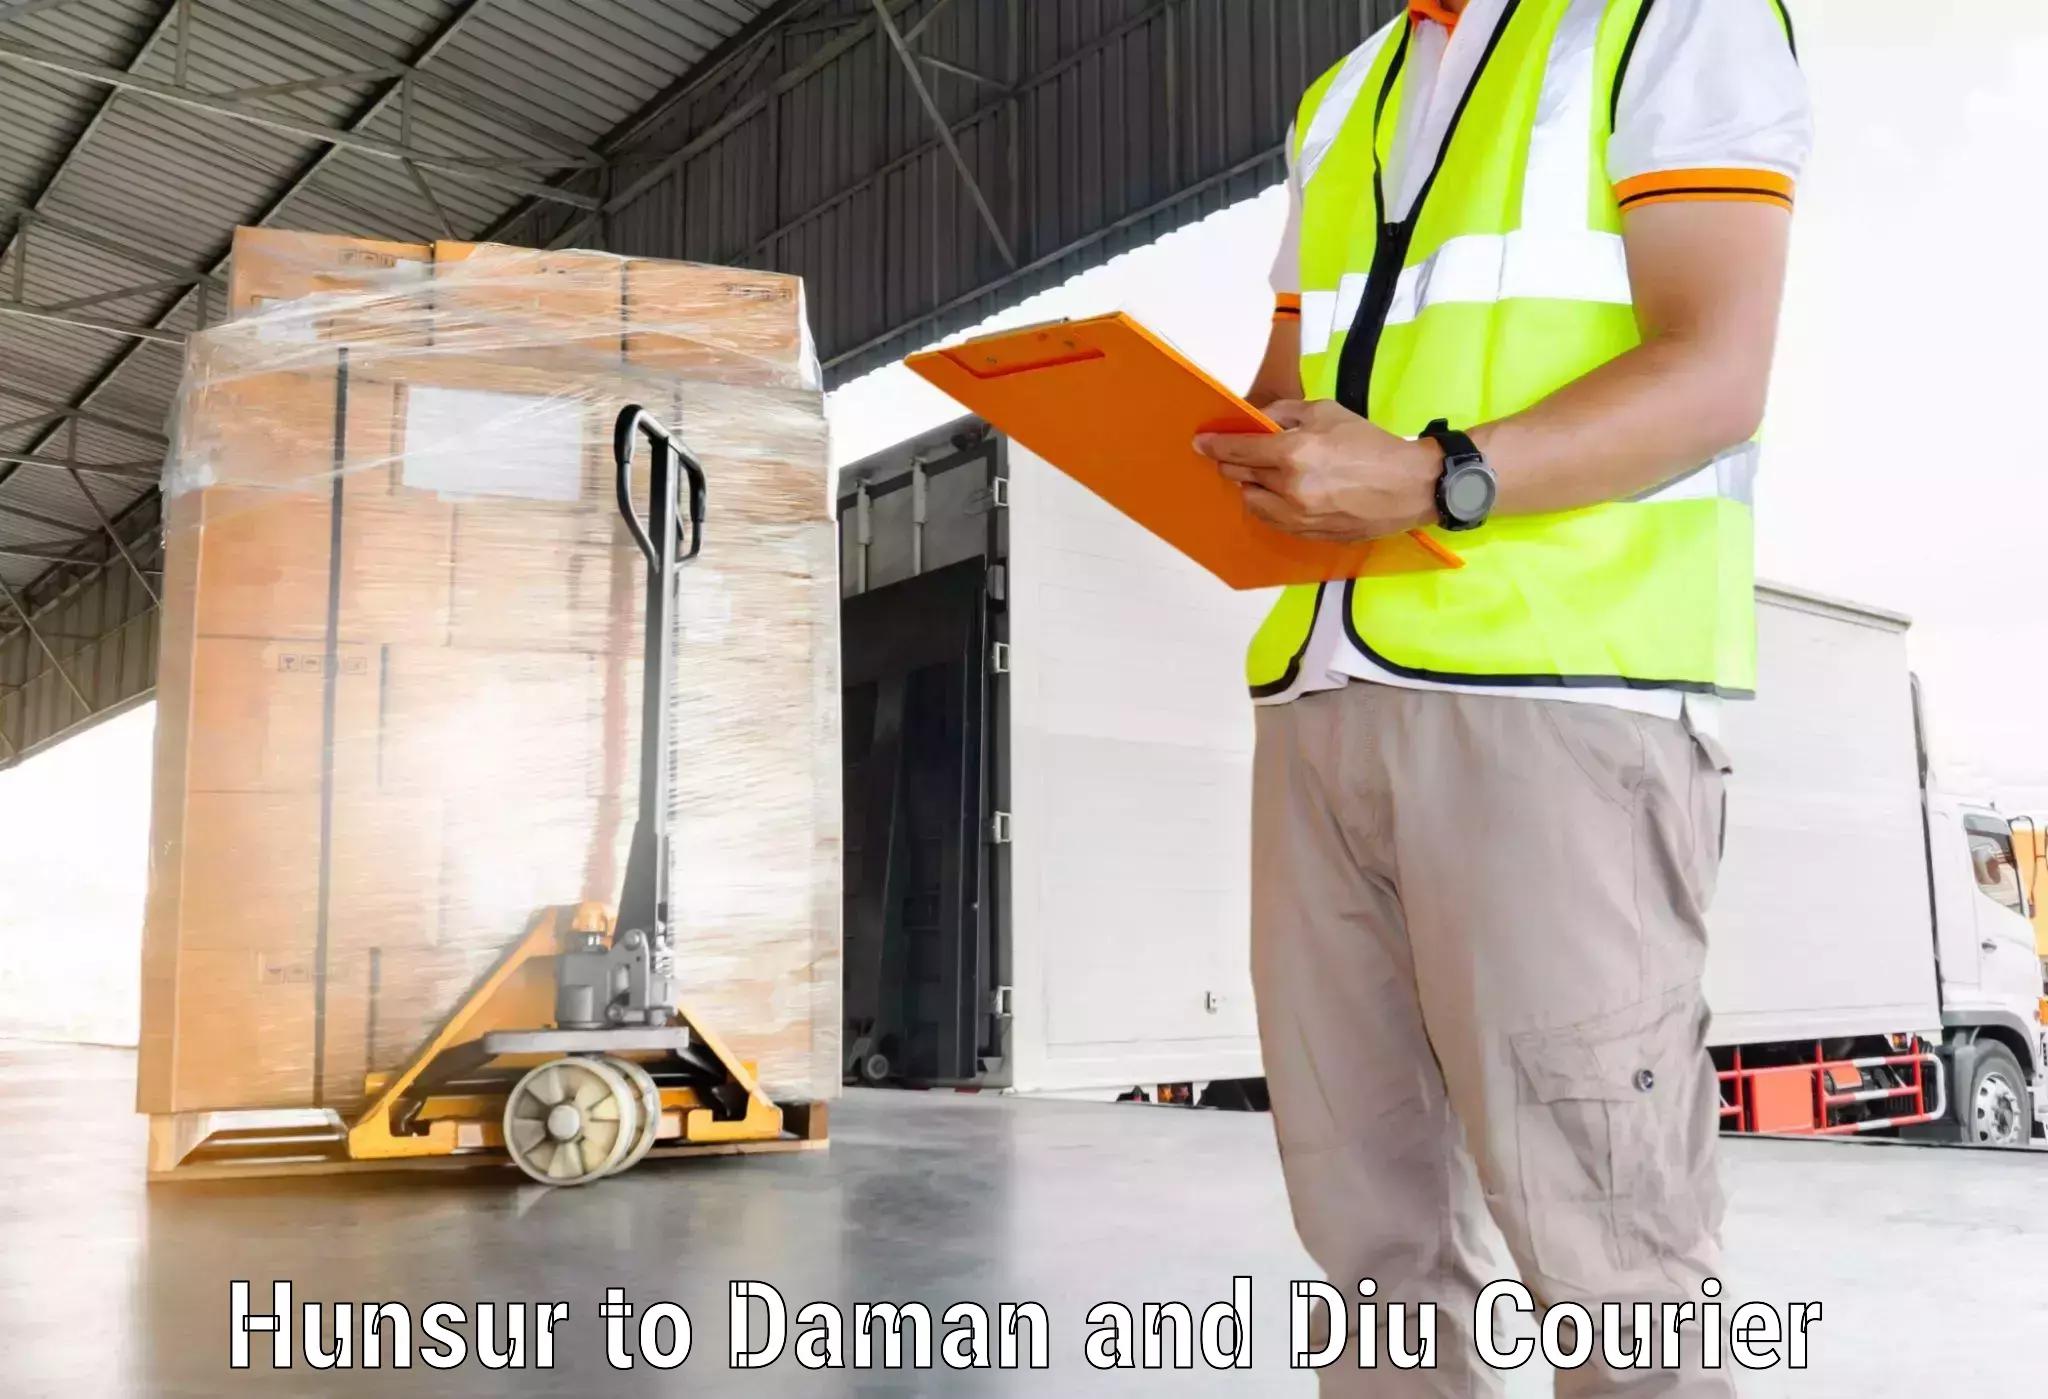 Efficient courier operations Hunsur to Daman and Diu